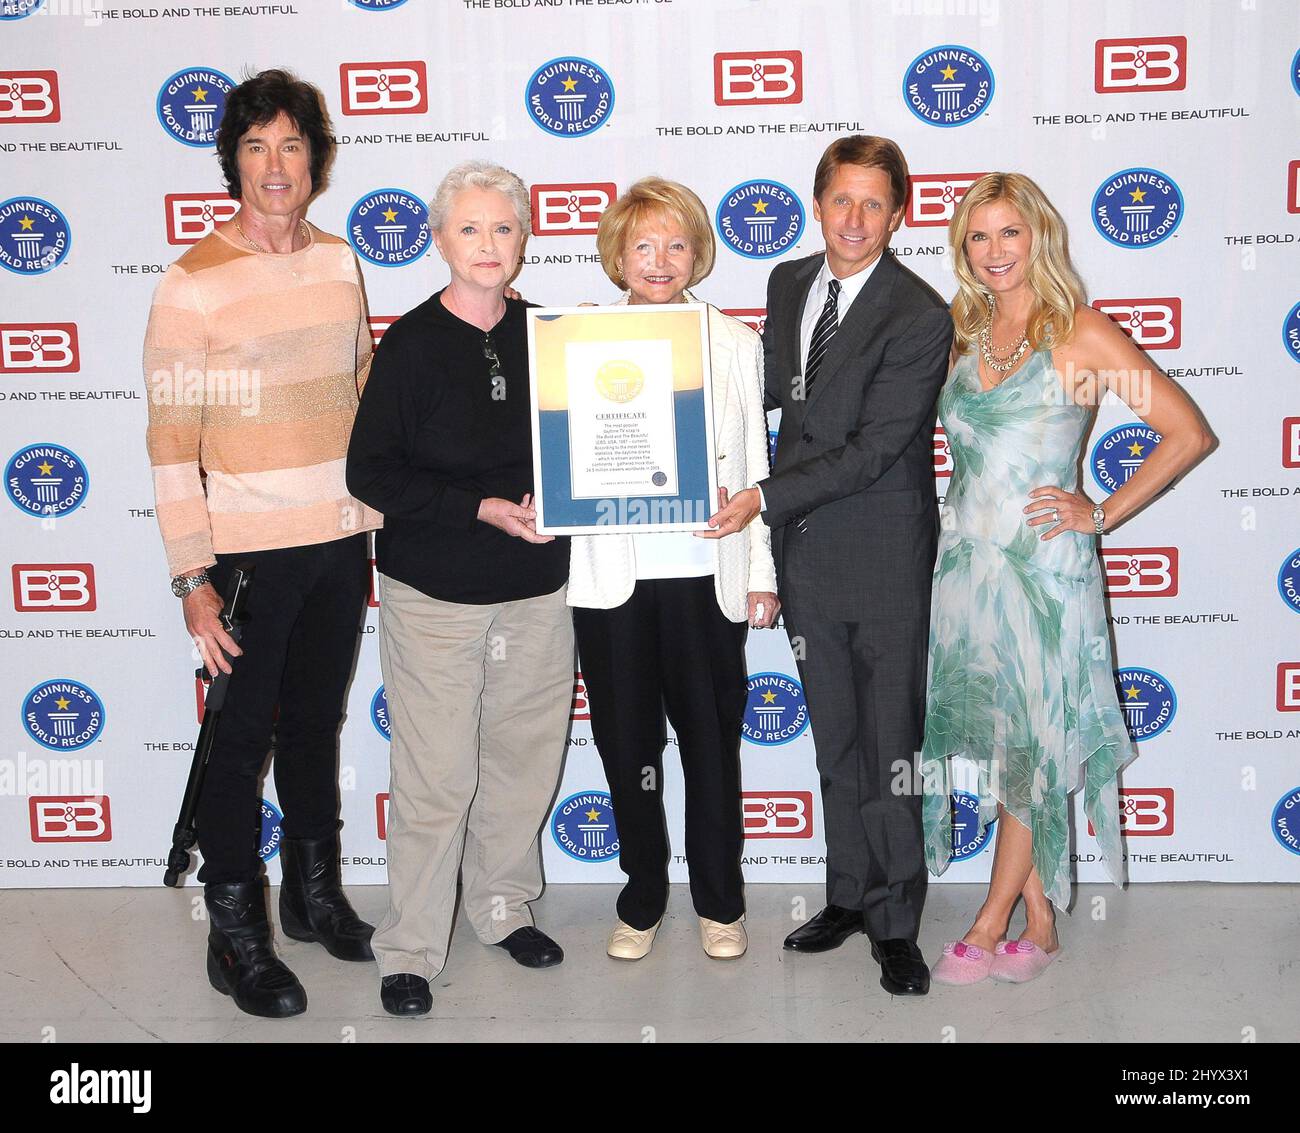 Ronn Moss, Susan Flannery, Lee Phillip Bell, Bradley Bell and Katherine Kelly Lang during Guinness World Records announcement of 'The Bold and the Beautiful' as most popular daytime TV soap on stage 31 at CBS Television City, Los Angeles Stock Photo